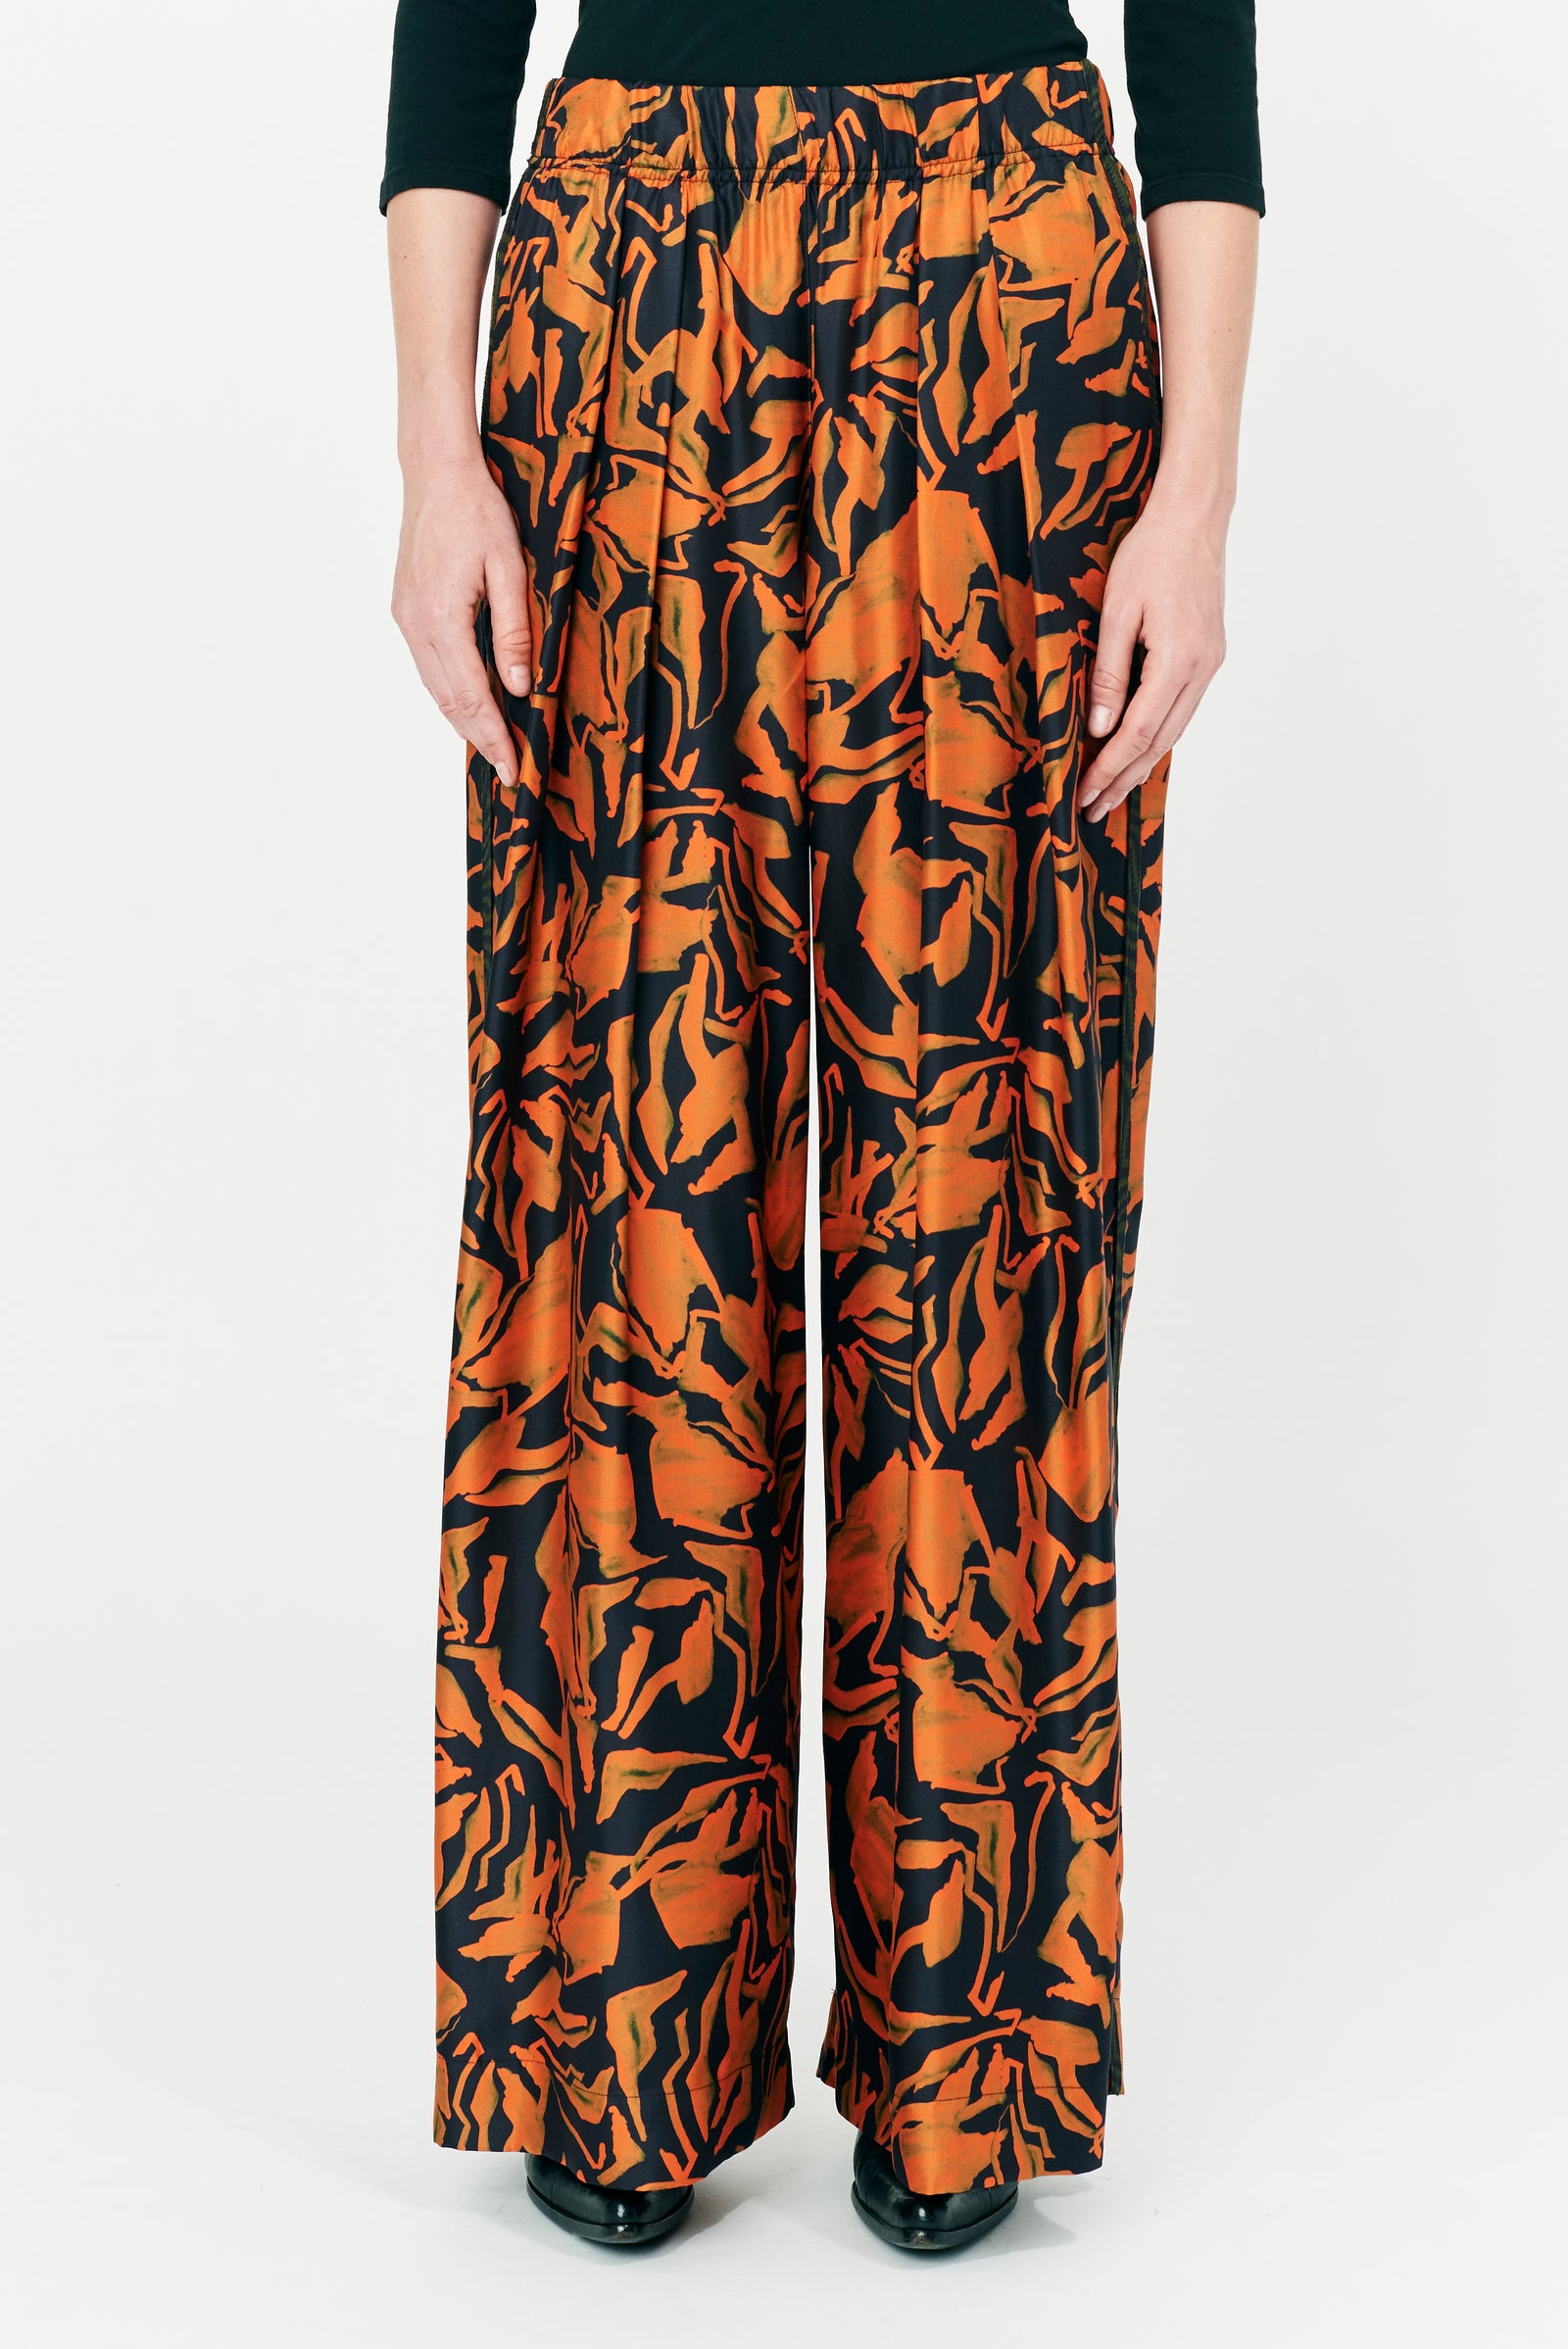 Painted Abstract Forest Vibrations Silk Print Wide Leg Pant Front Close-Up View